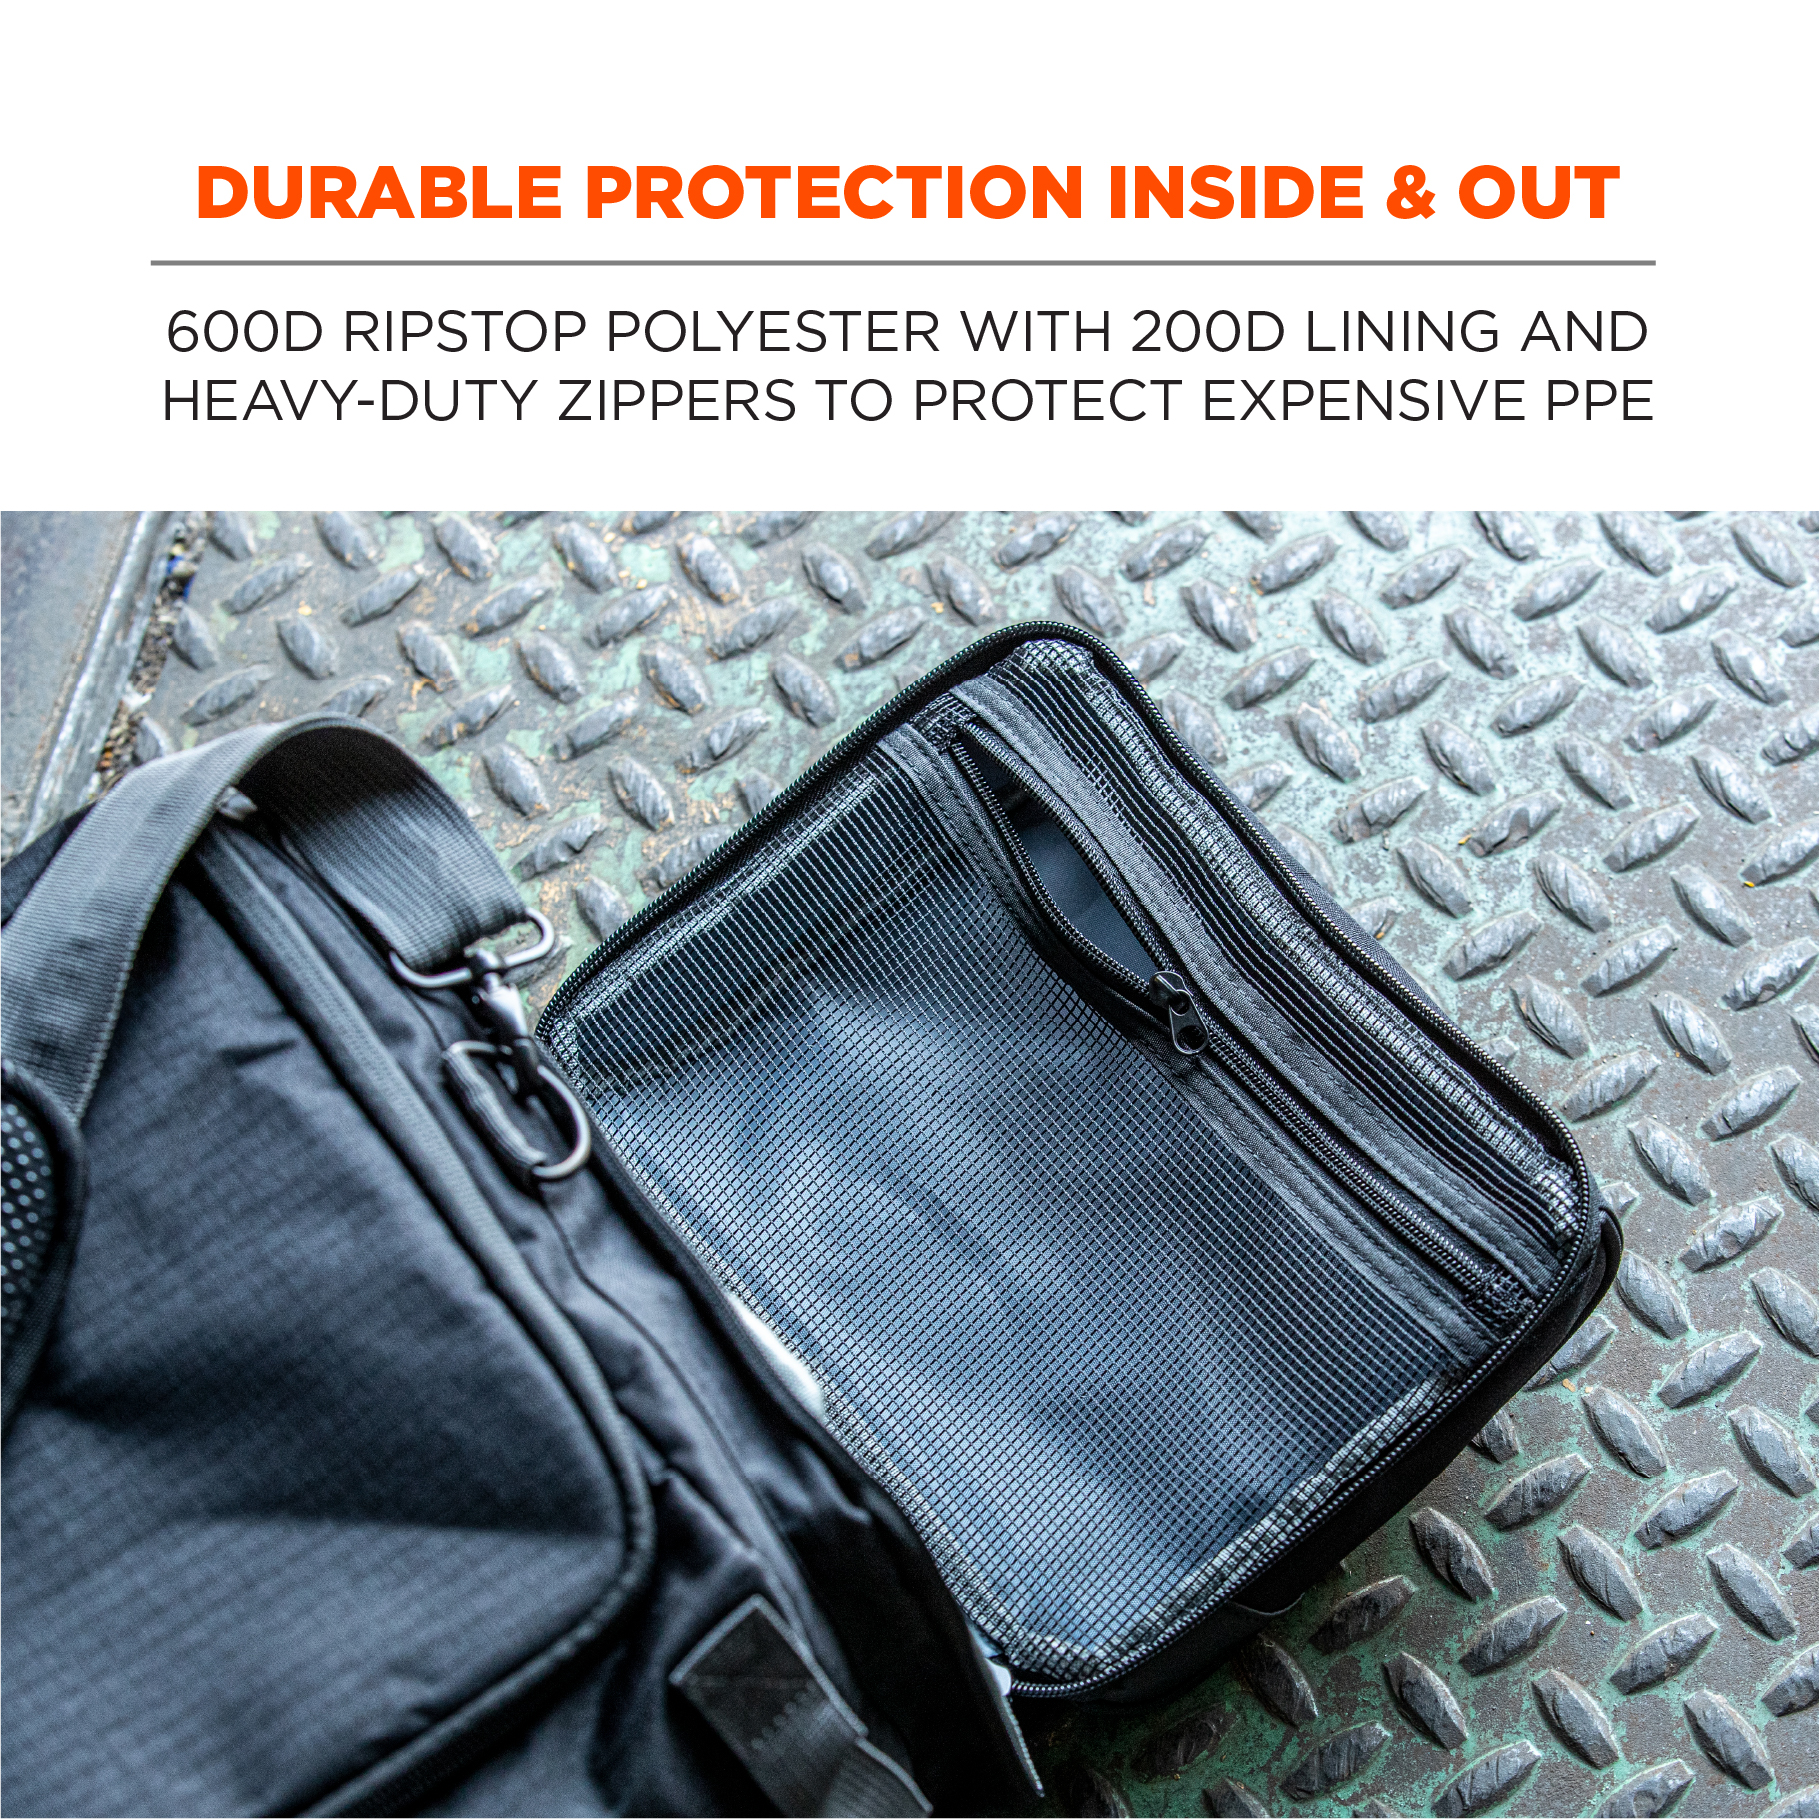 https://www.ergodyne.com/sites/default/files/product-images/13189-5189-ppe-duffel-bag-black-durable-protection-inside-and-out.jpg